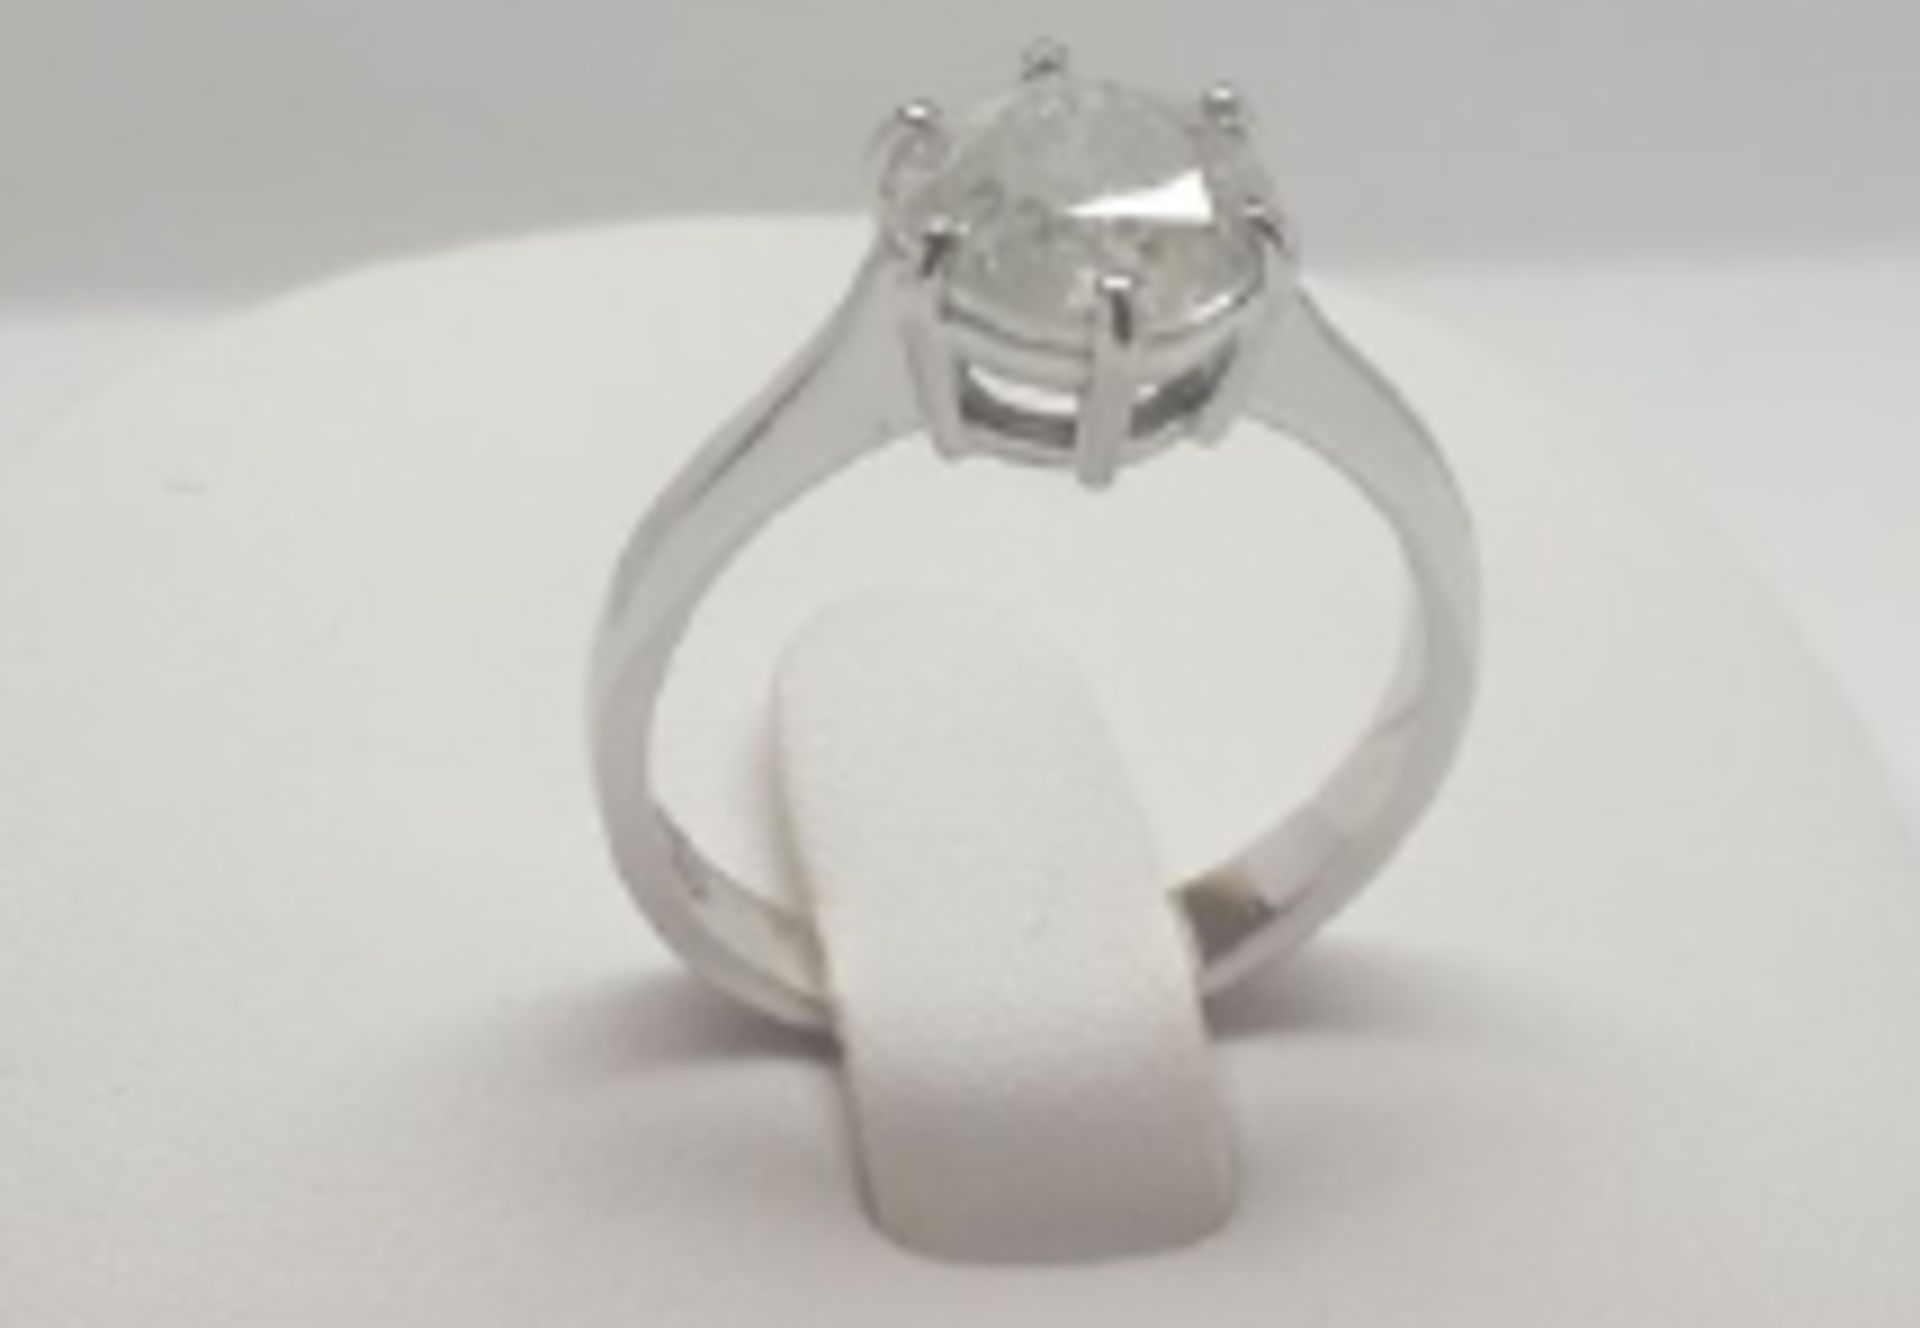 A 2 Carat Solitaire Diamond Set in 14k white gold. A single stone set in a classic siz claw setting